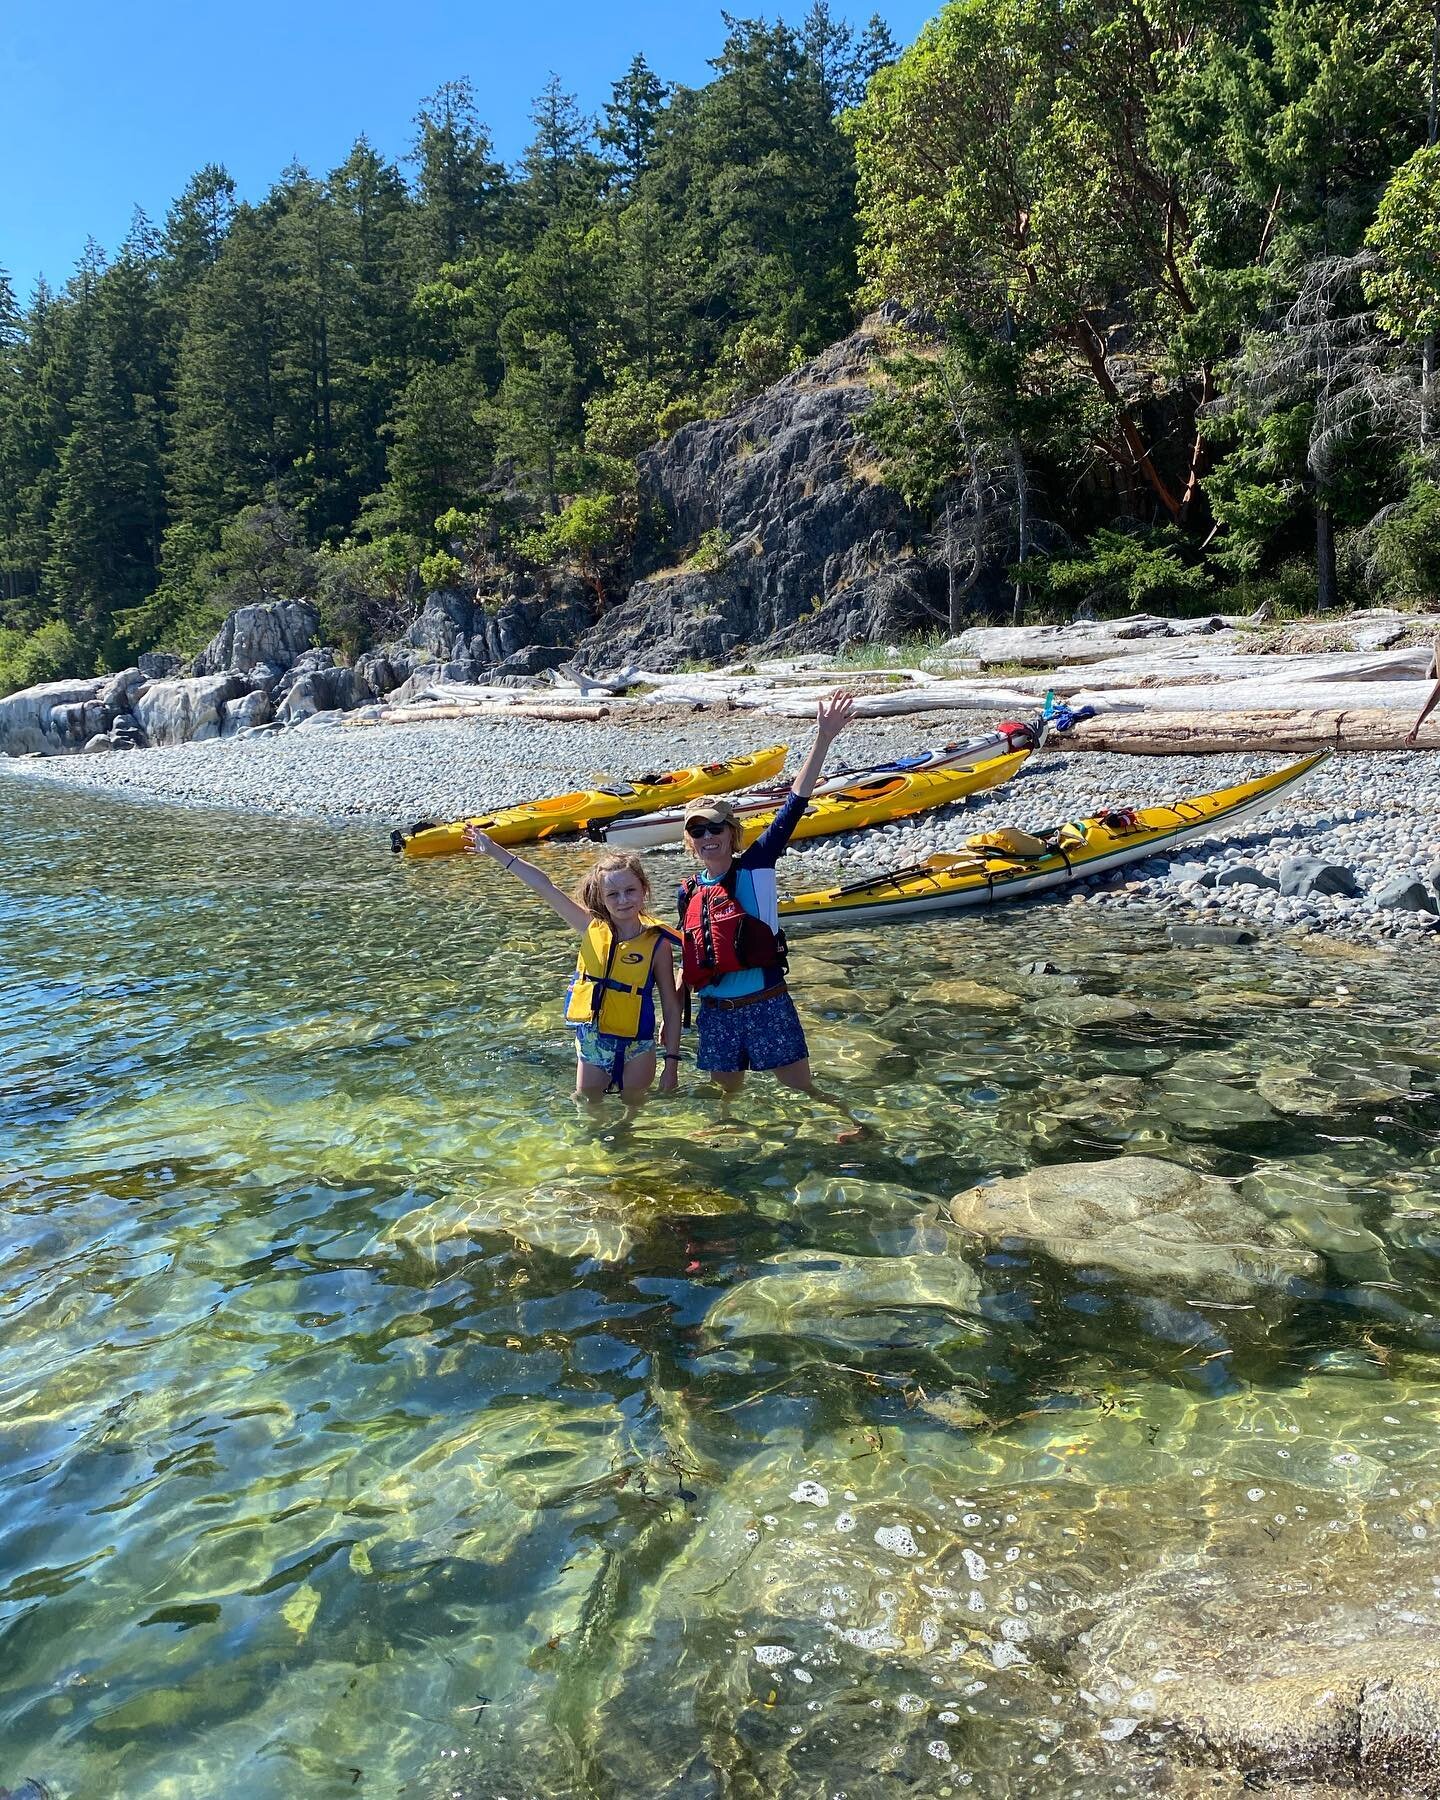 Join us for a trip in 2023! We have tons of paddling adventures lined up!!

&bull; 3 &amp; 4 day kayak adventures in Desolation sound and the Discovery Islands
&bull; lodge based kayak and yoga immersions at @hollyhocklife (6 days)
&bull; lodge based